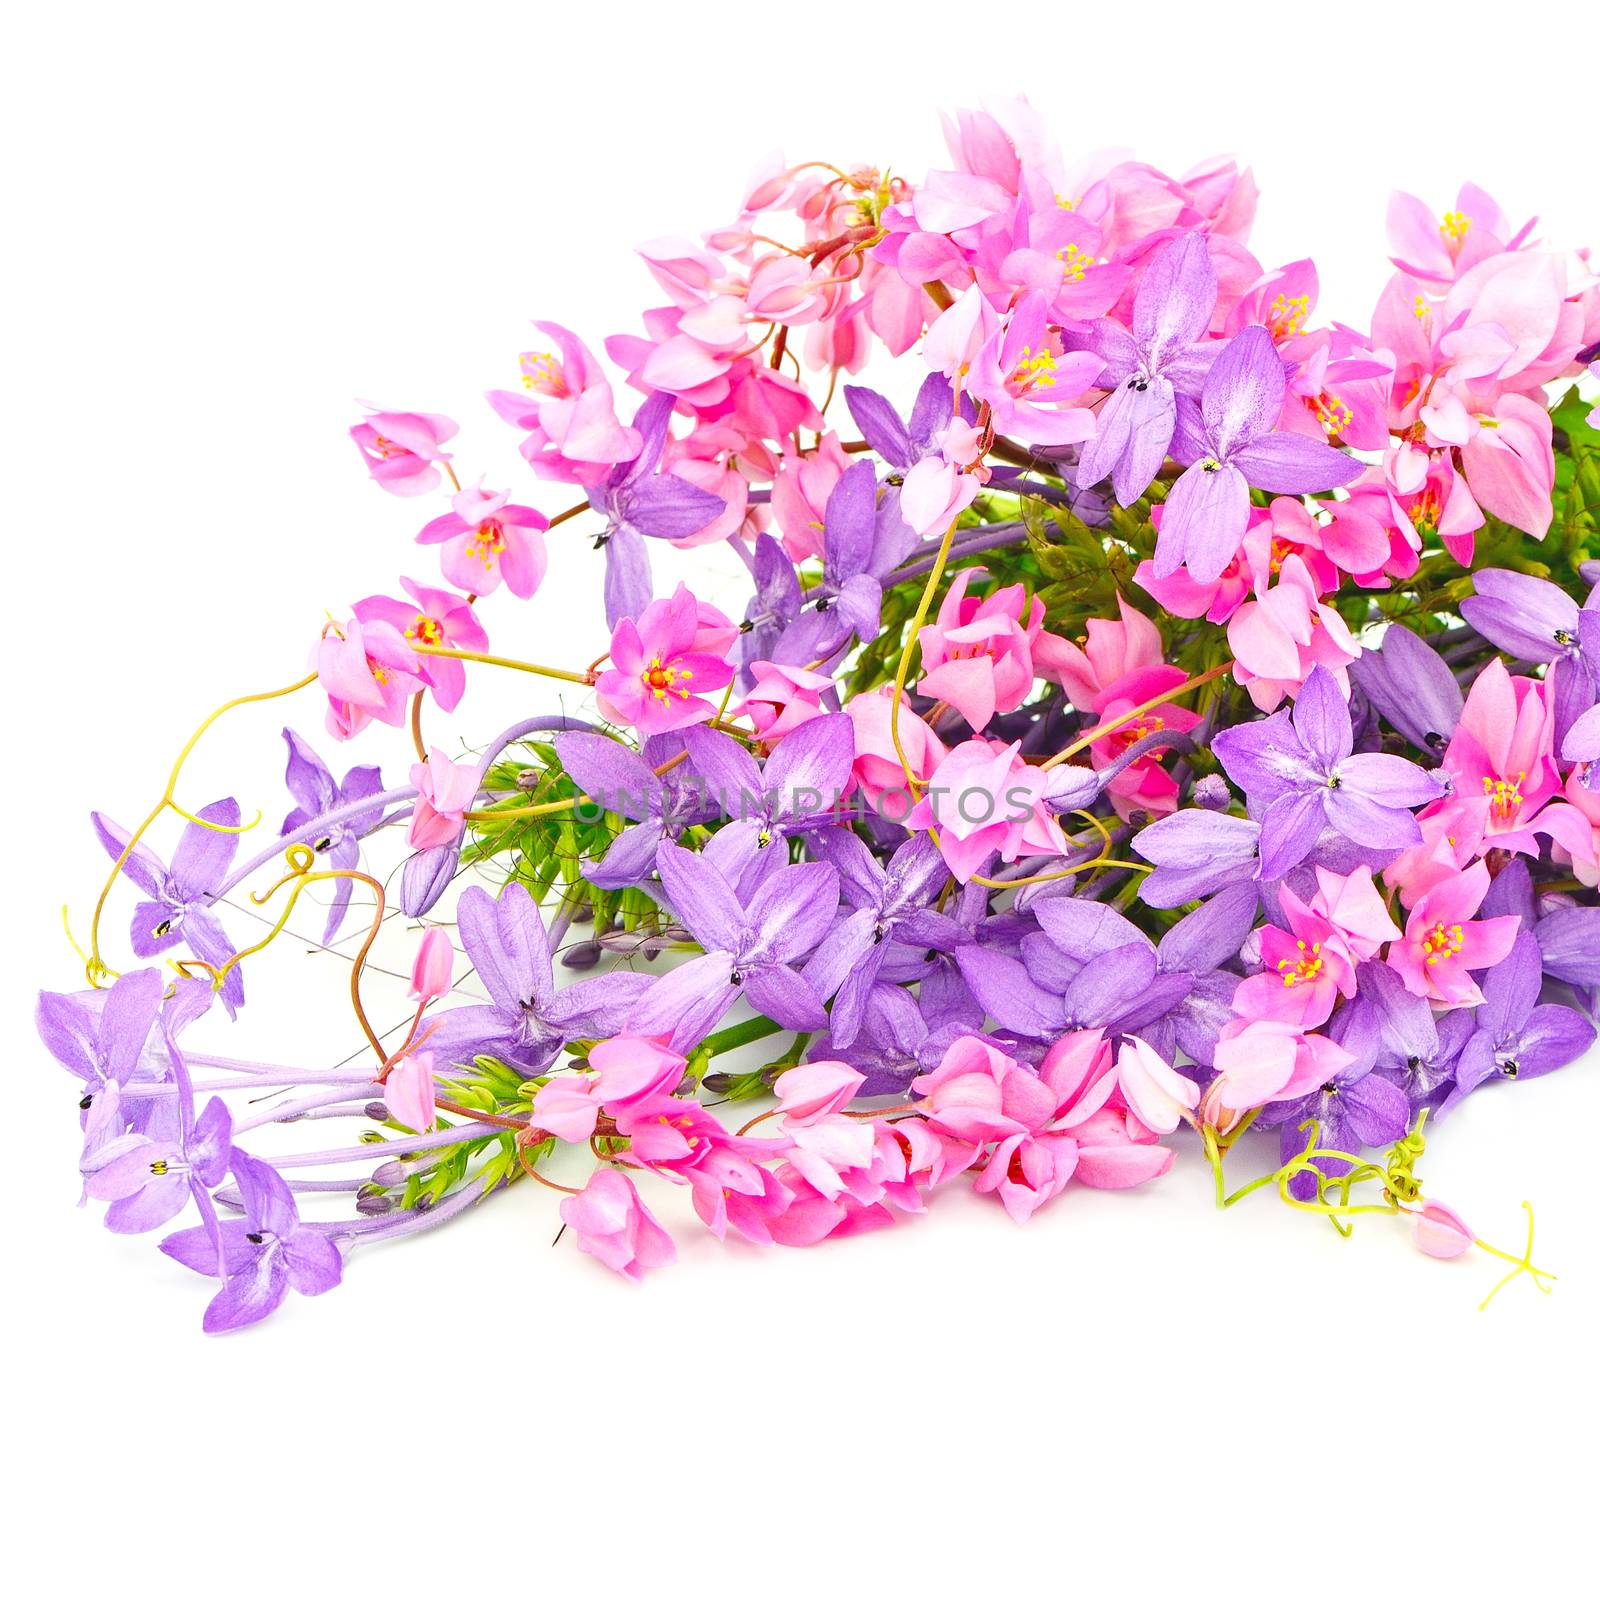 Summer flowers background isolated on a white background